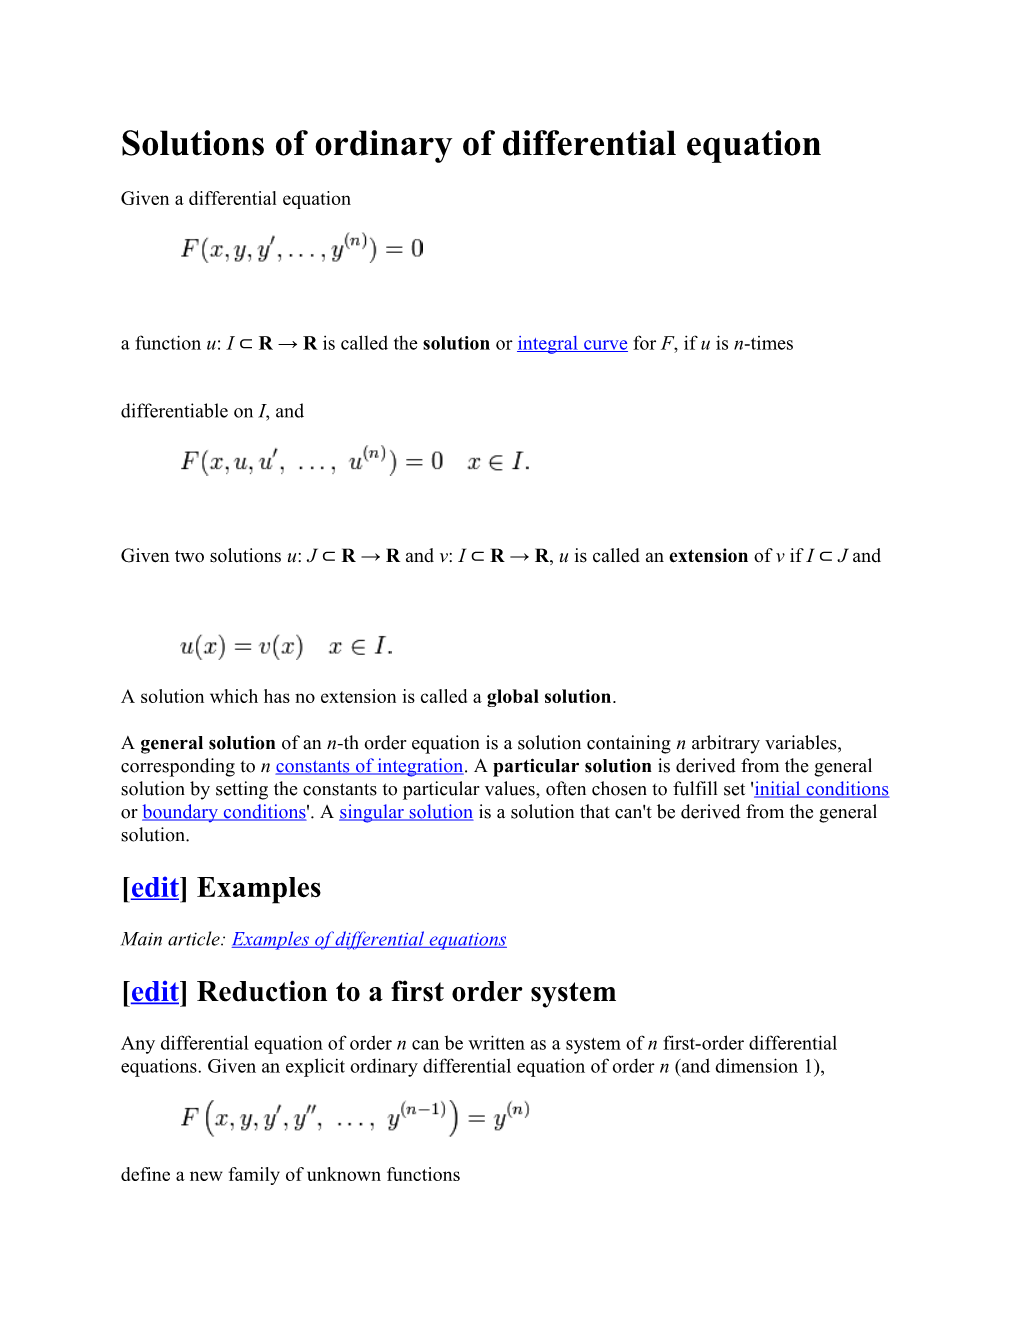 Solutions of Ordinary of Differential Equation